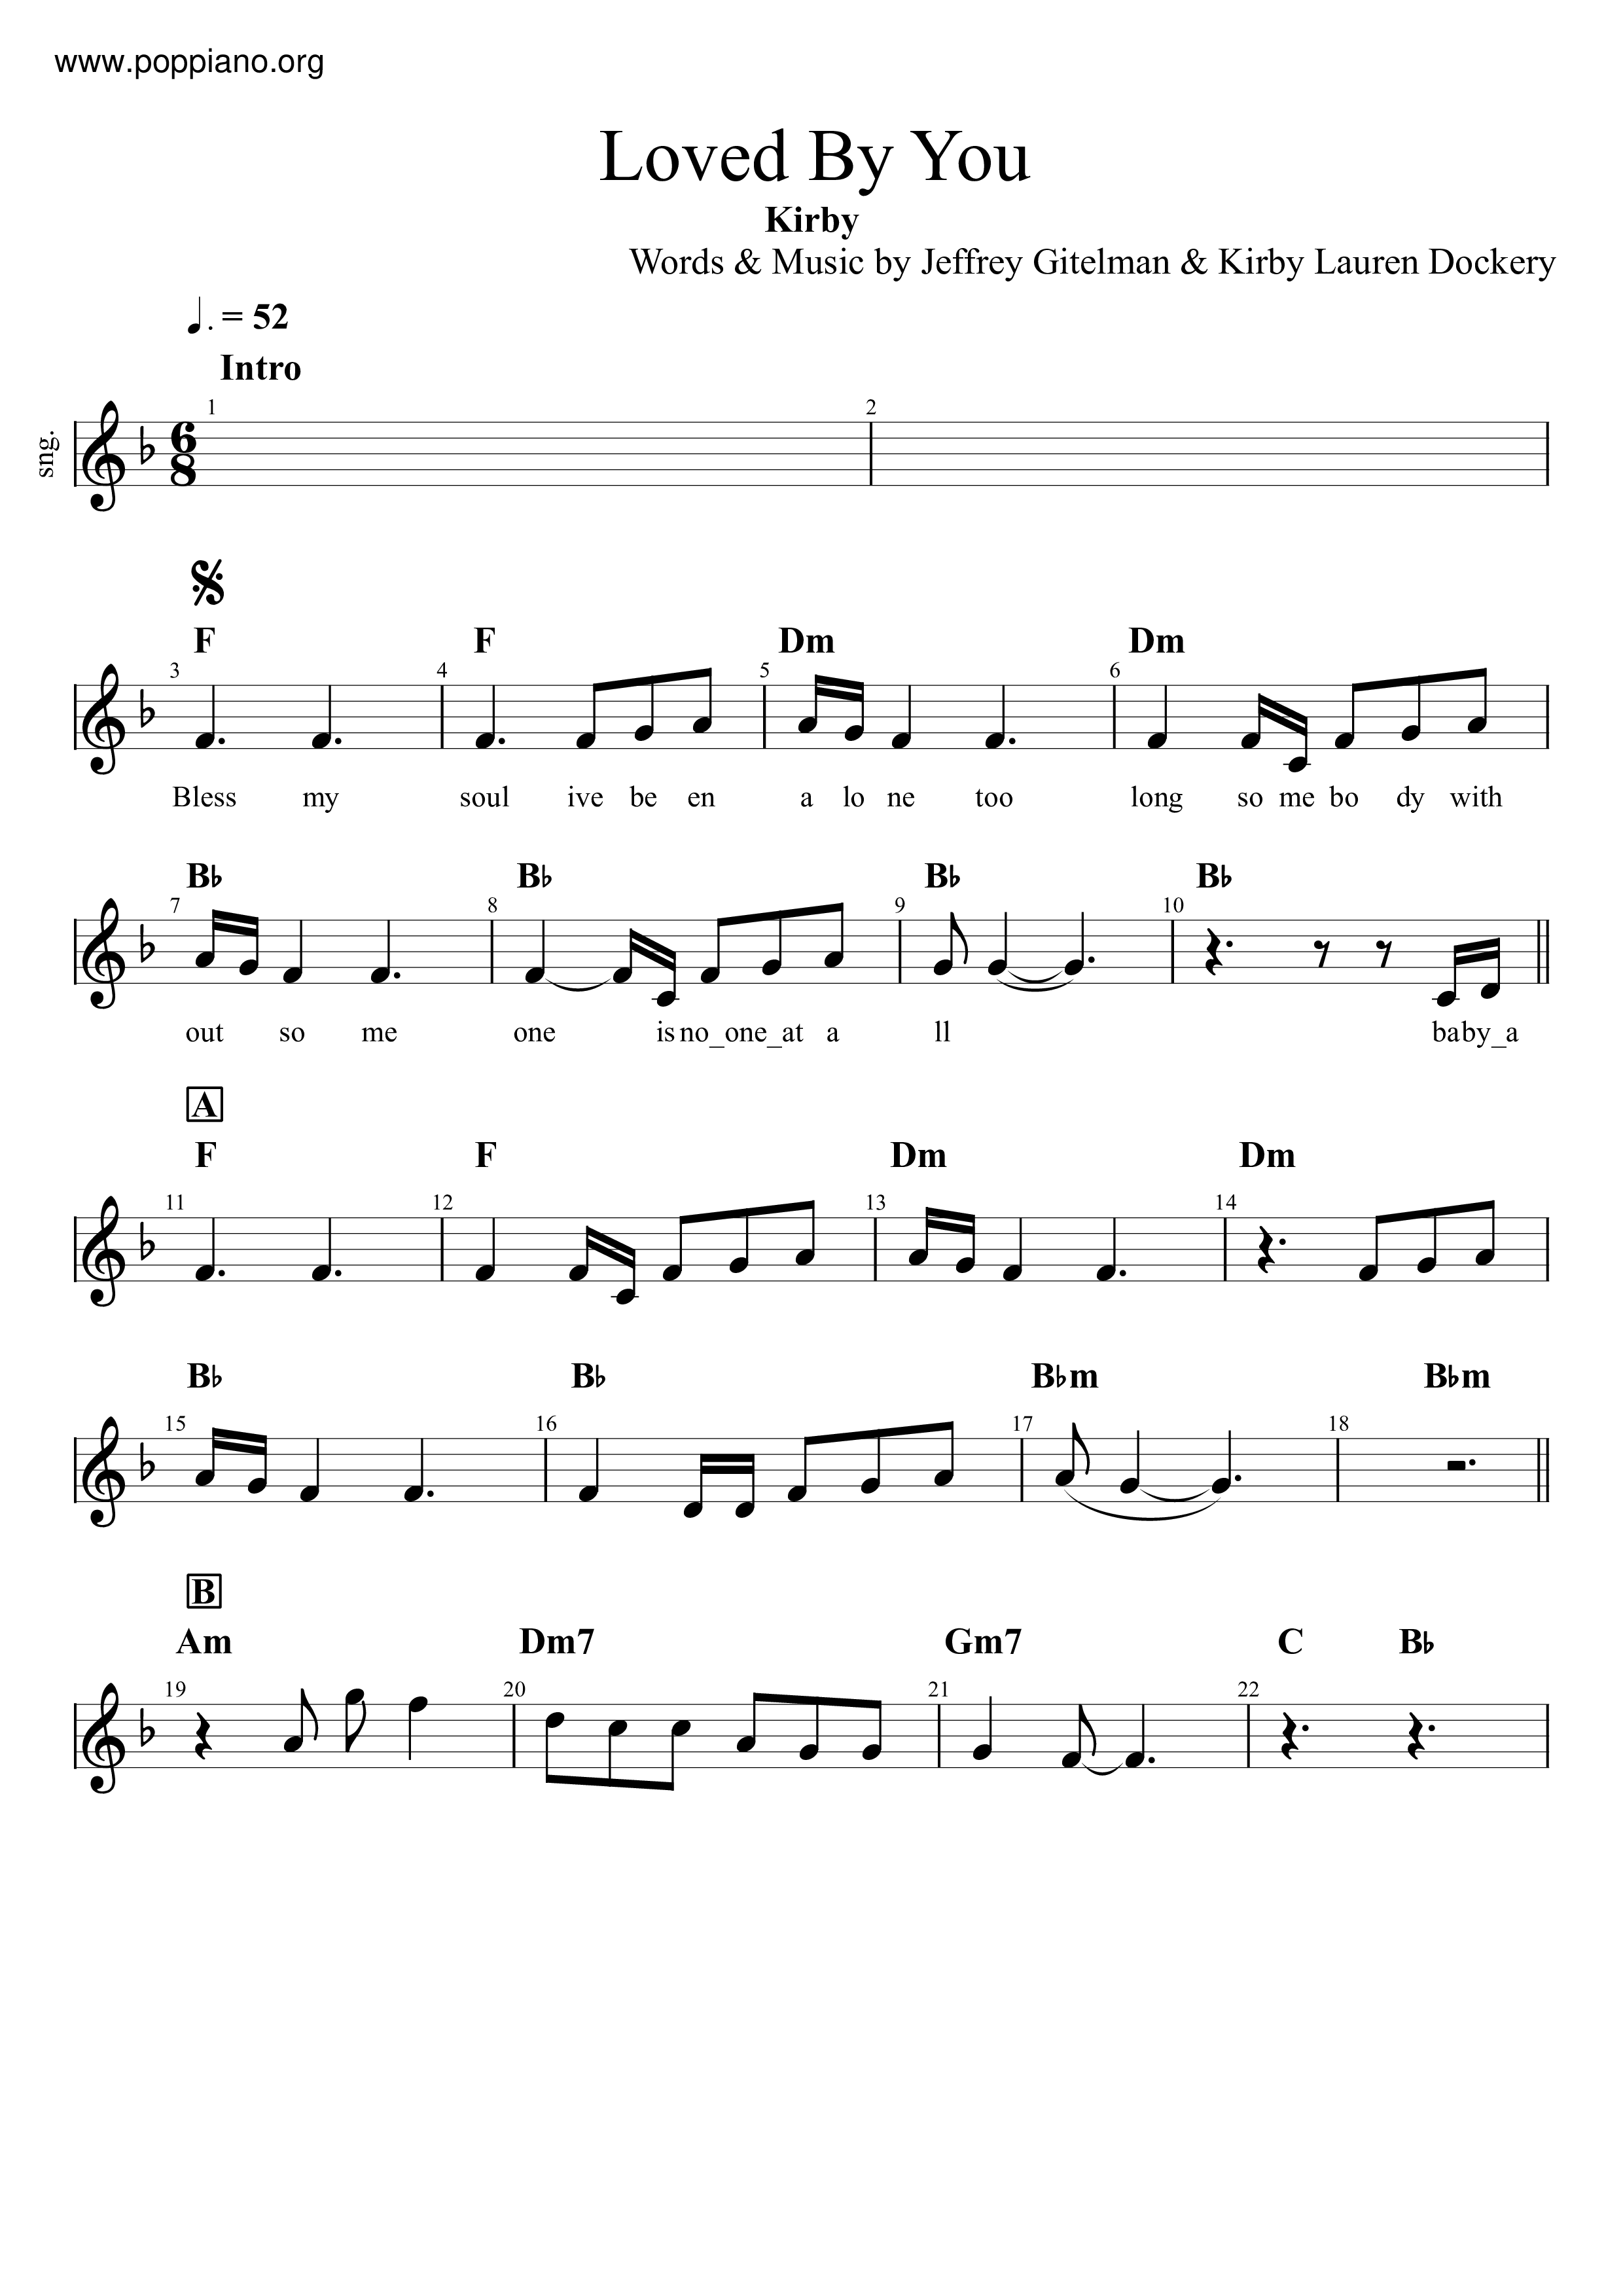 ☆ Kirby-Loved By You Sheet Music pdf, - Free Score Download ☆